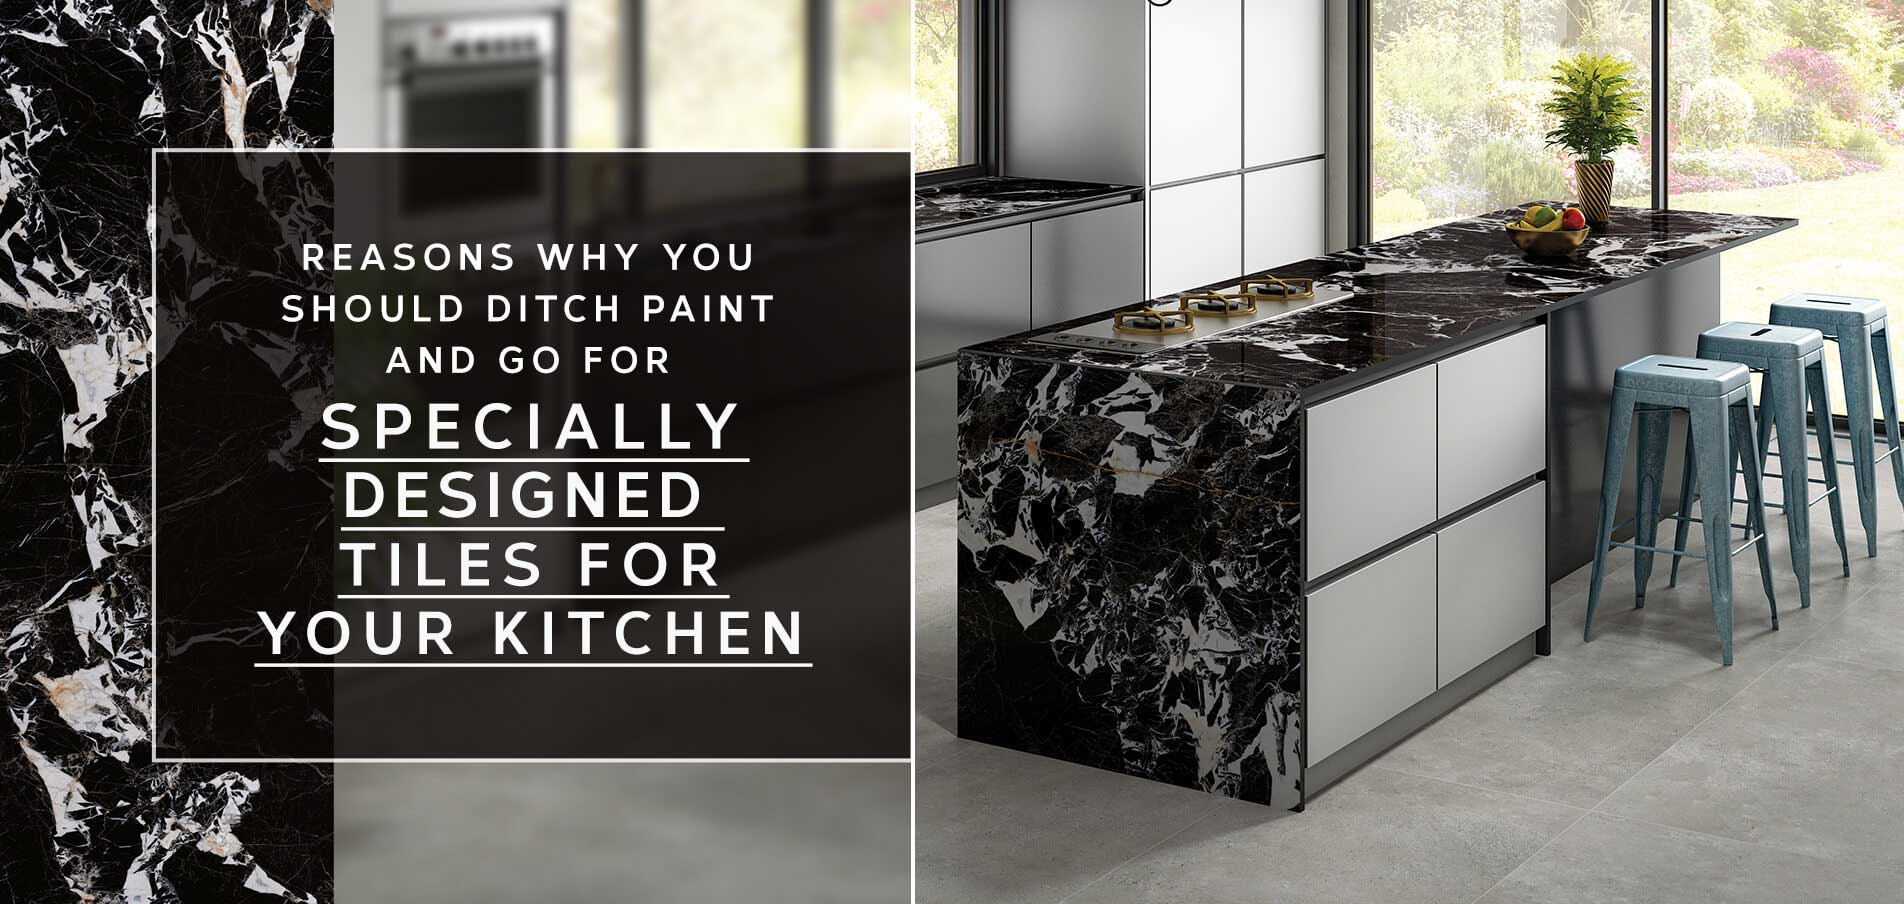 Reasons Why You Should Ditch Paint And Go For Specially Designed Tiles For Your Kitchen